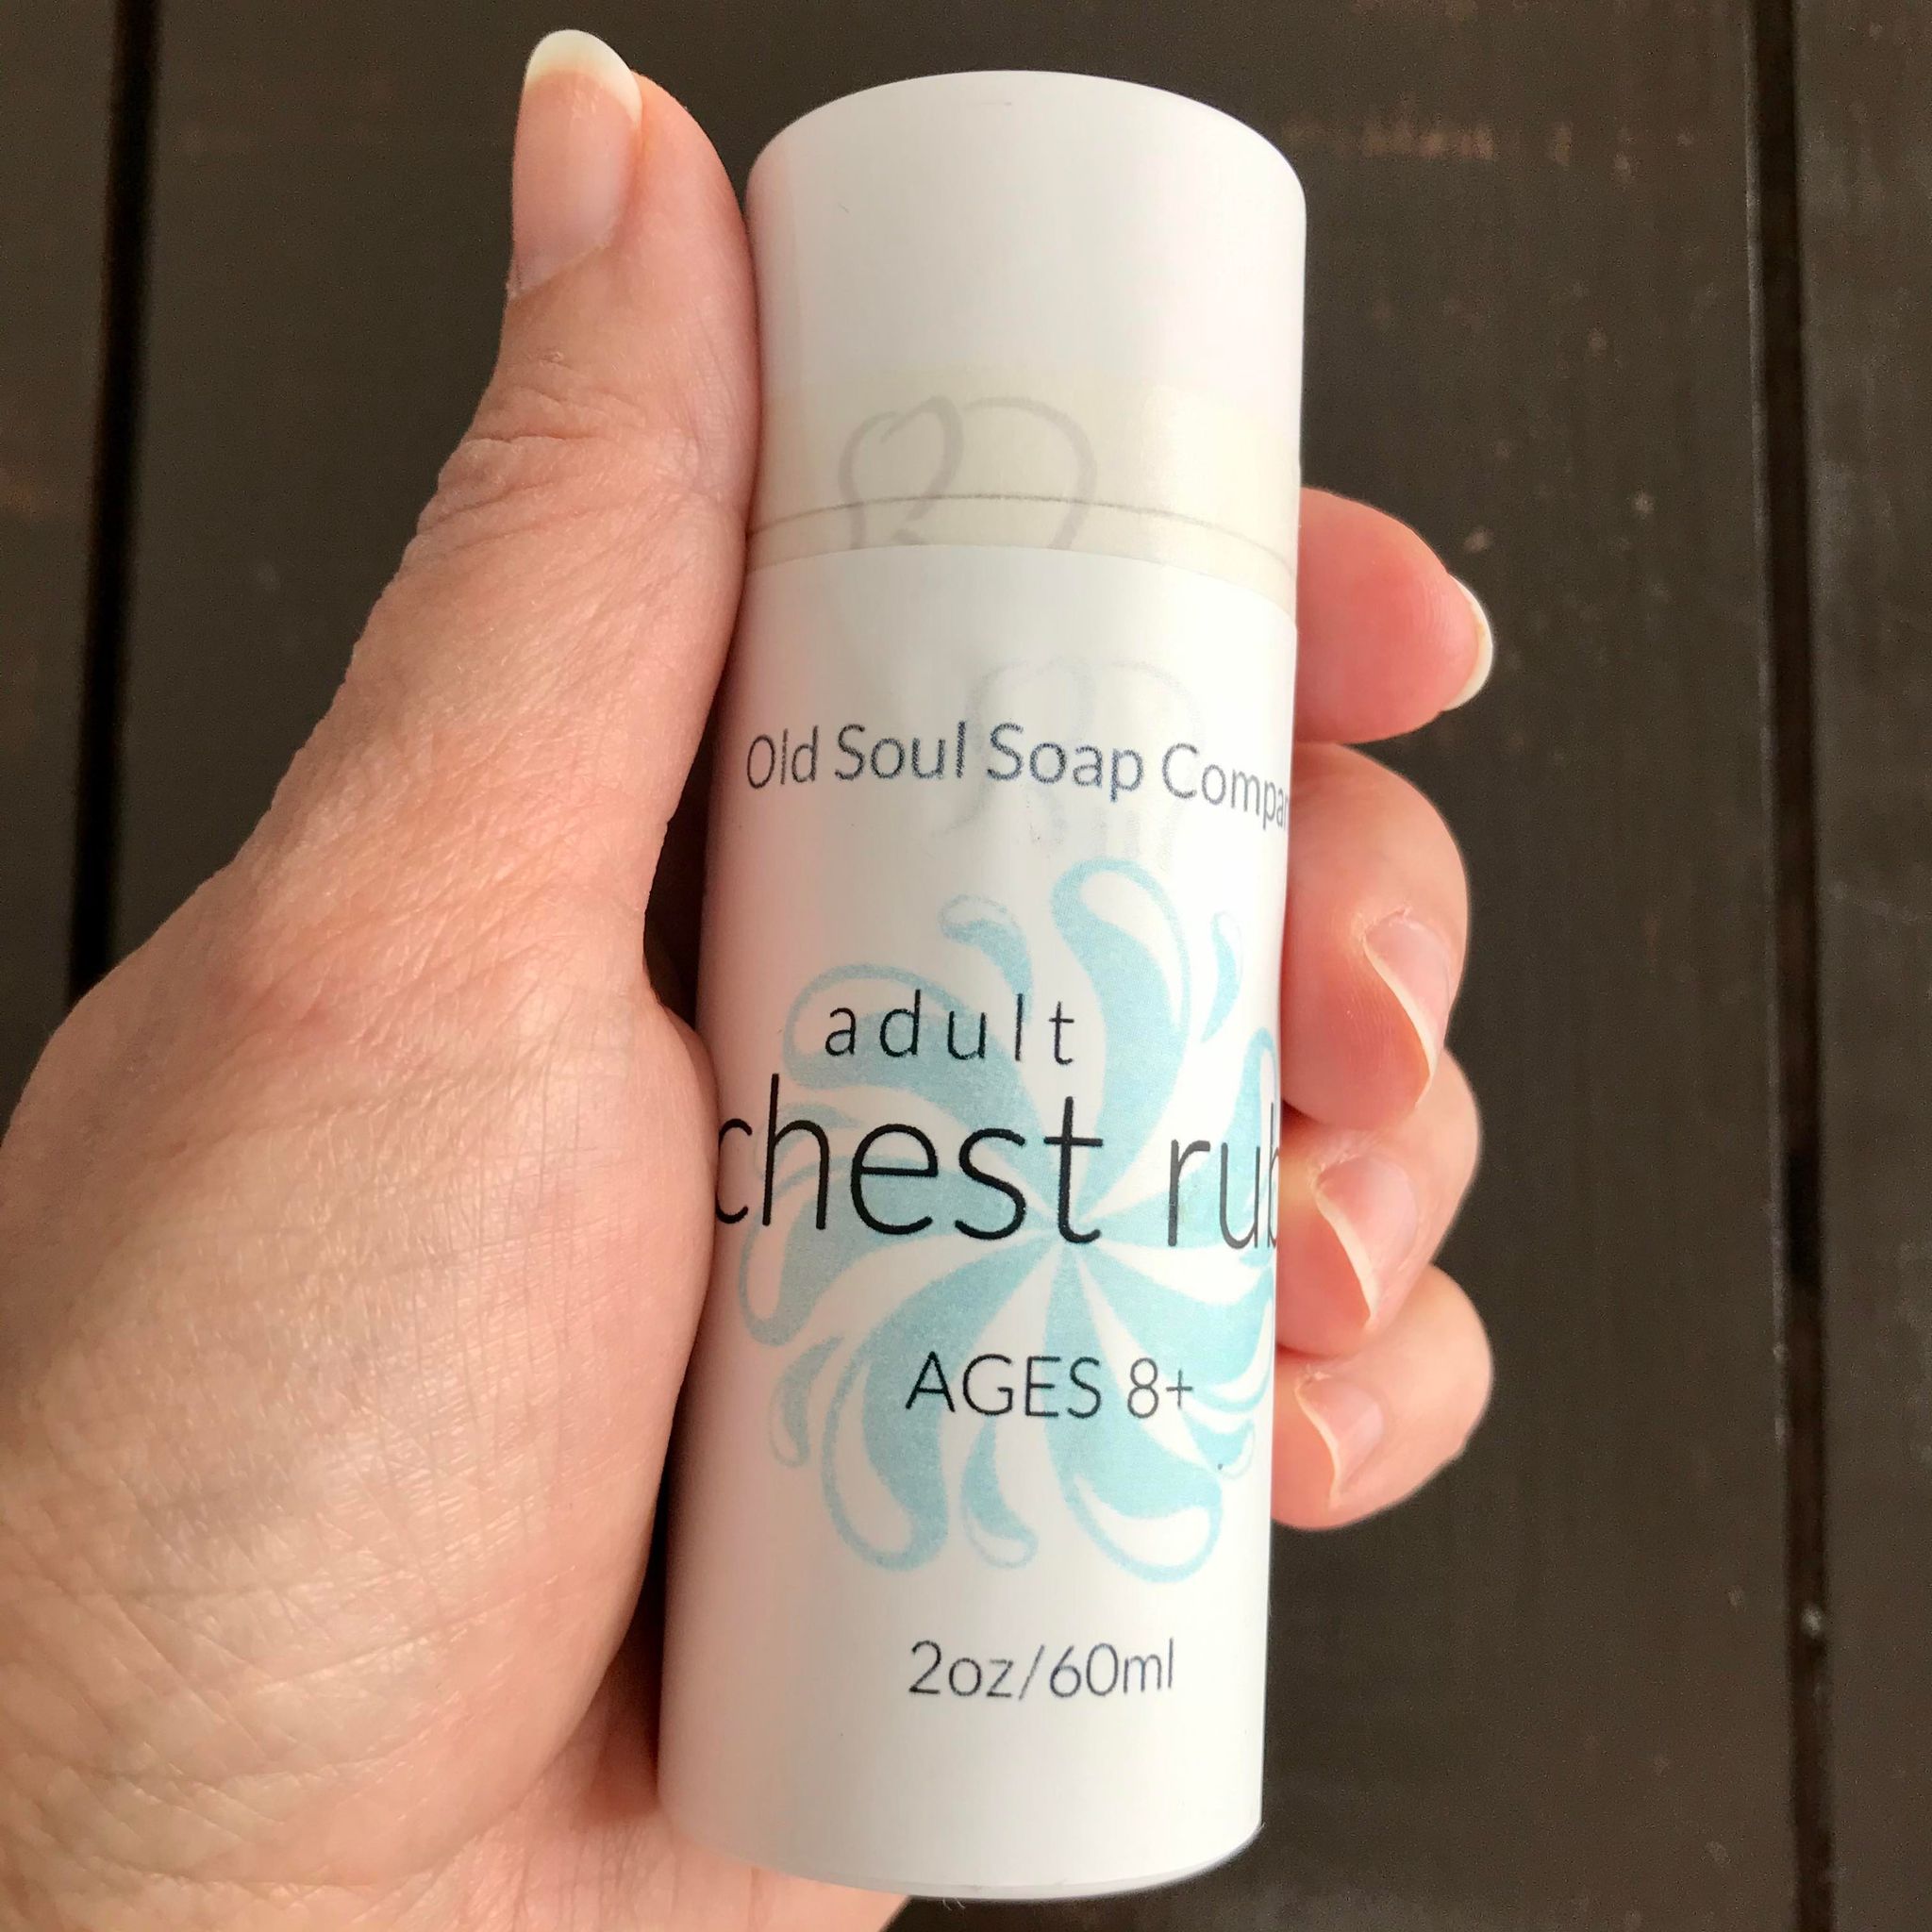 Natural chest rub balm 60 ml for adults comes in a compostable push up cardboard tube and is made in Canada by the Old Soul Soap Company